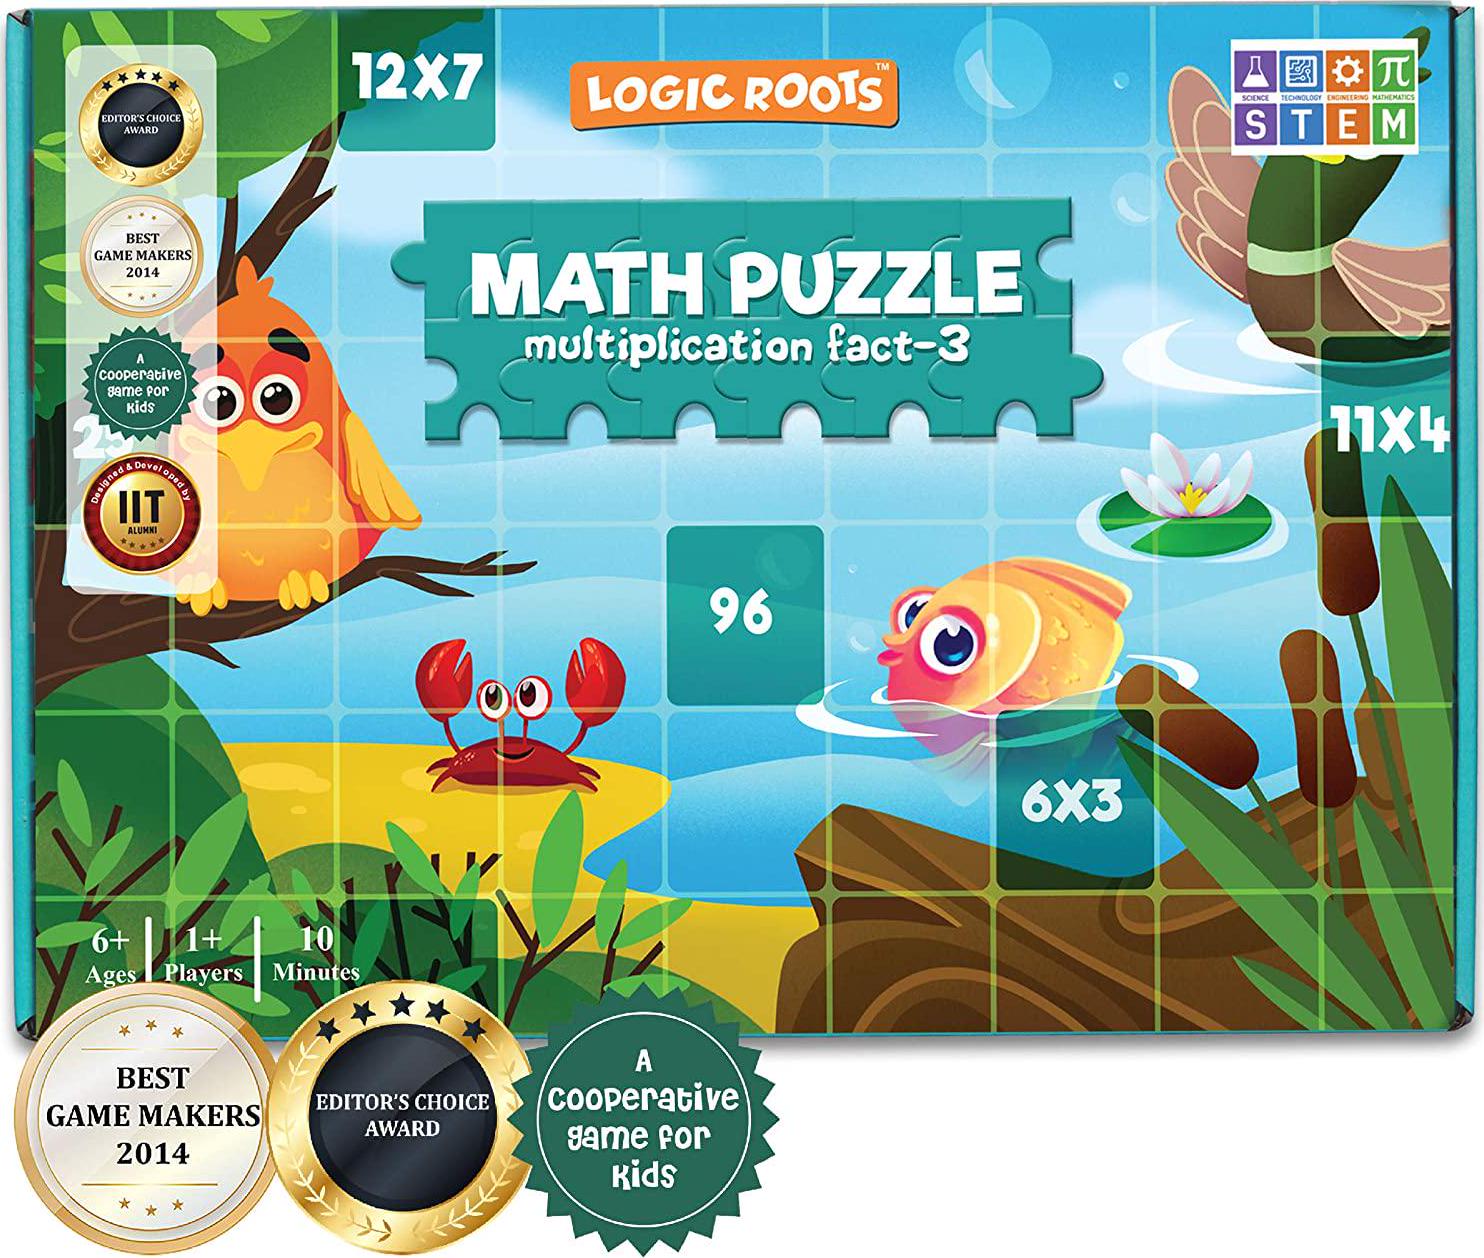 Logic Roots, Logic Roots Math Puzzle for Kids - Multiplication Table 10-12 Practice, Fun STEM Toy for 5 - 8 Year Olds, 4 Foam Puzzles with 10 Pieces Each, Learning Gift for Kids, Homeschoolers, Grade 1 and Up